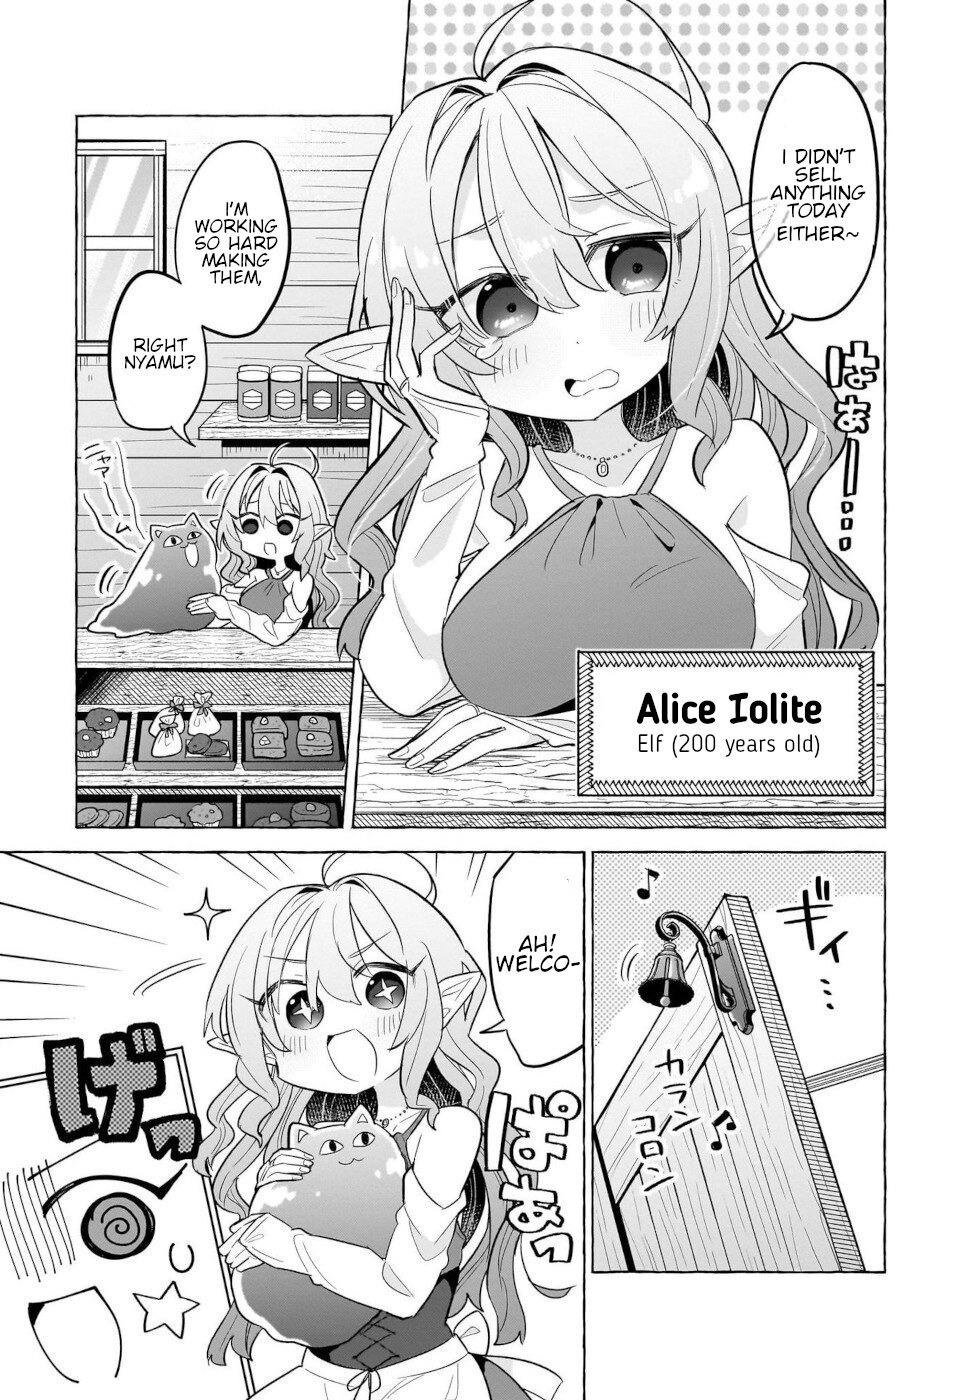 Sweets, Elf, And A High School Girl - chapter 1 - #4